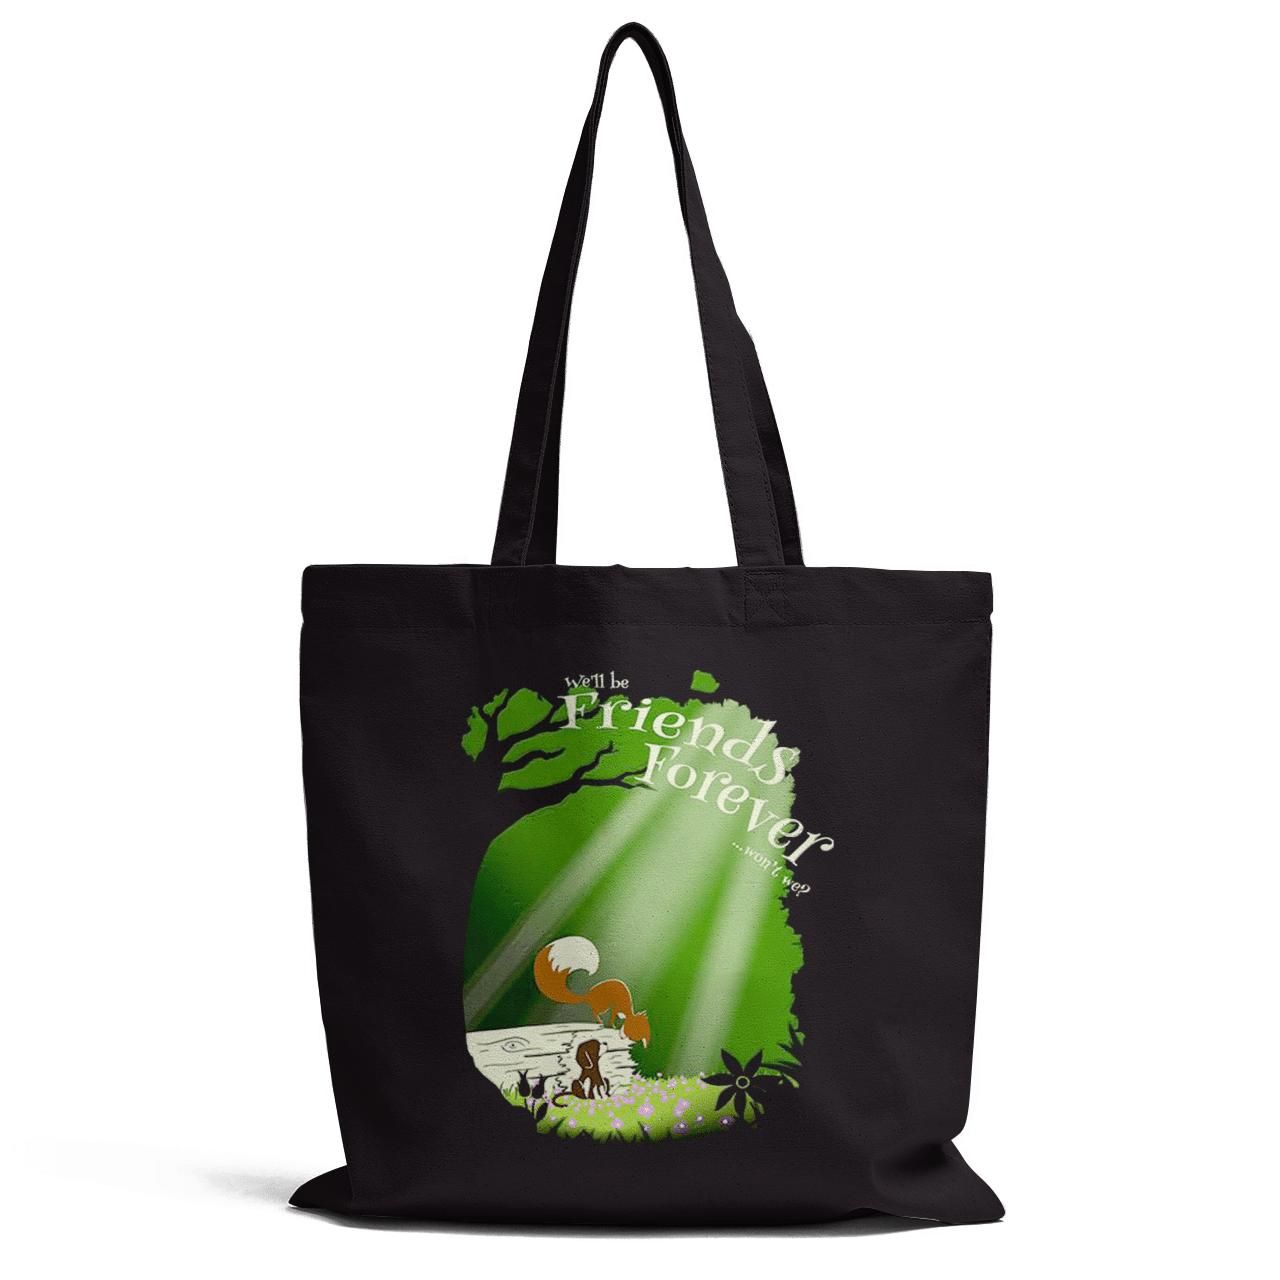 We Will Be Friend Forever Tote Bag